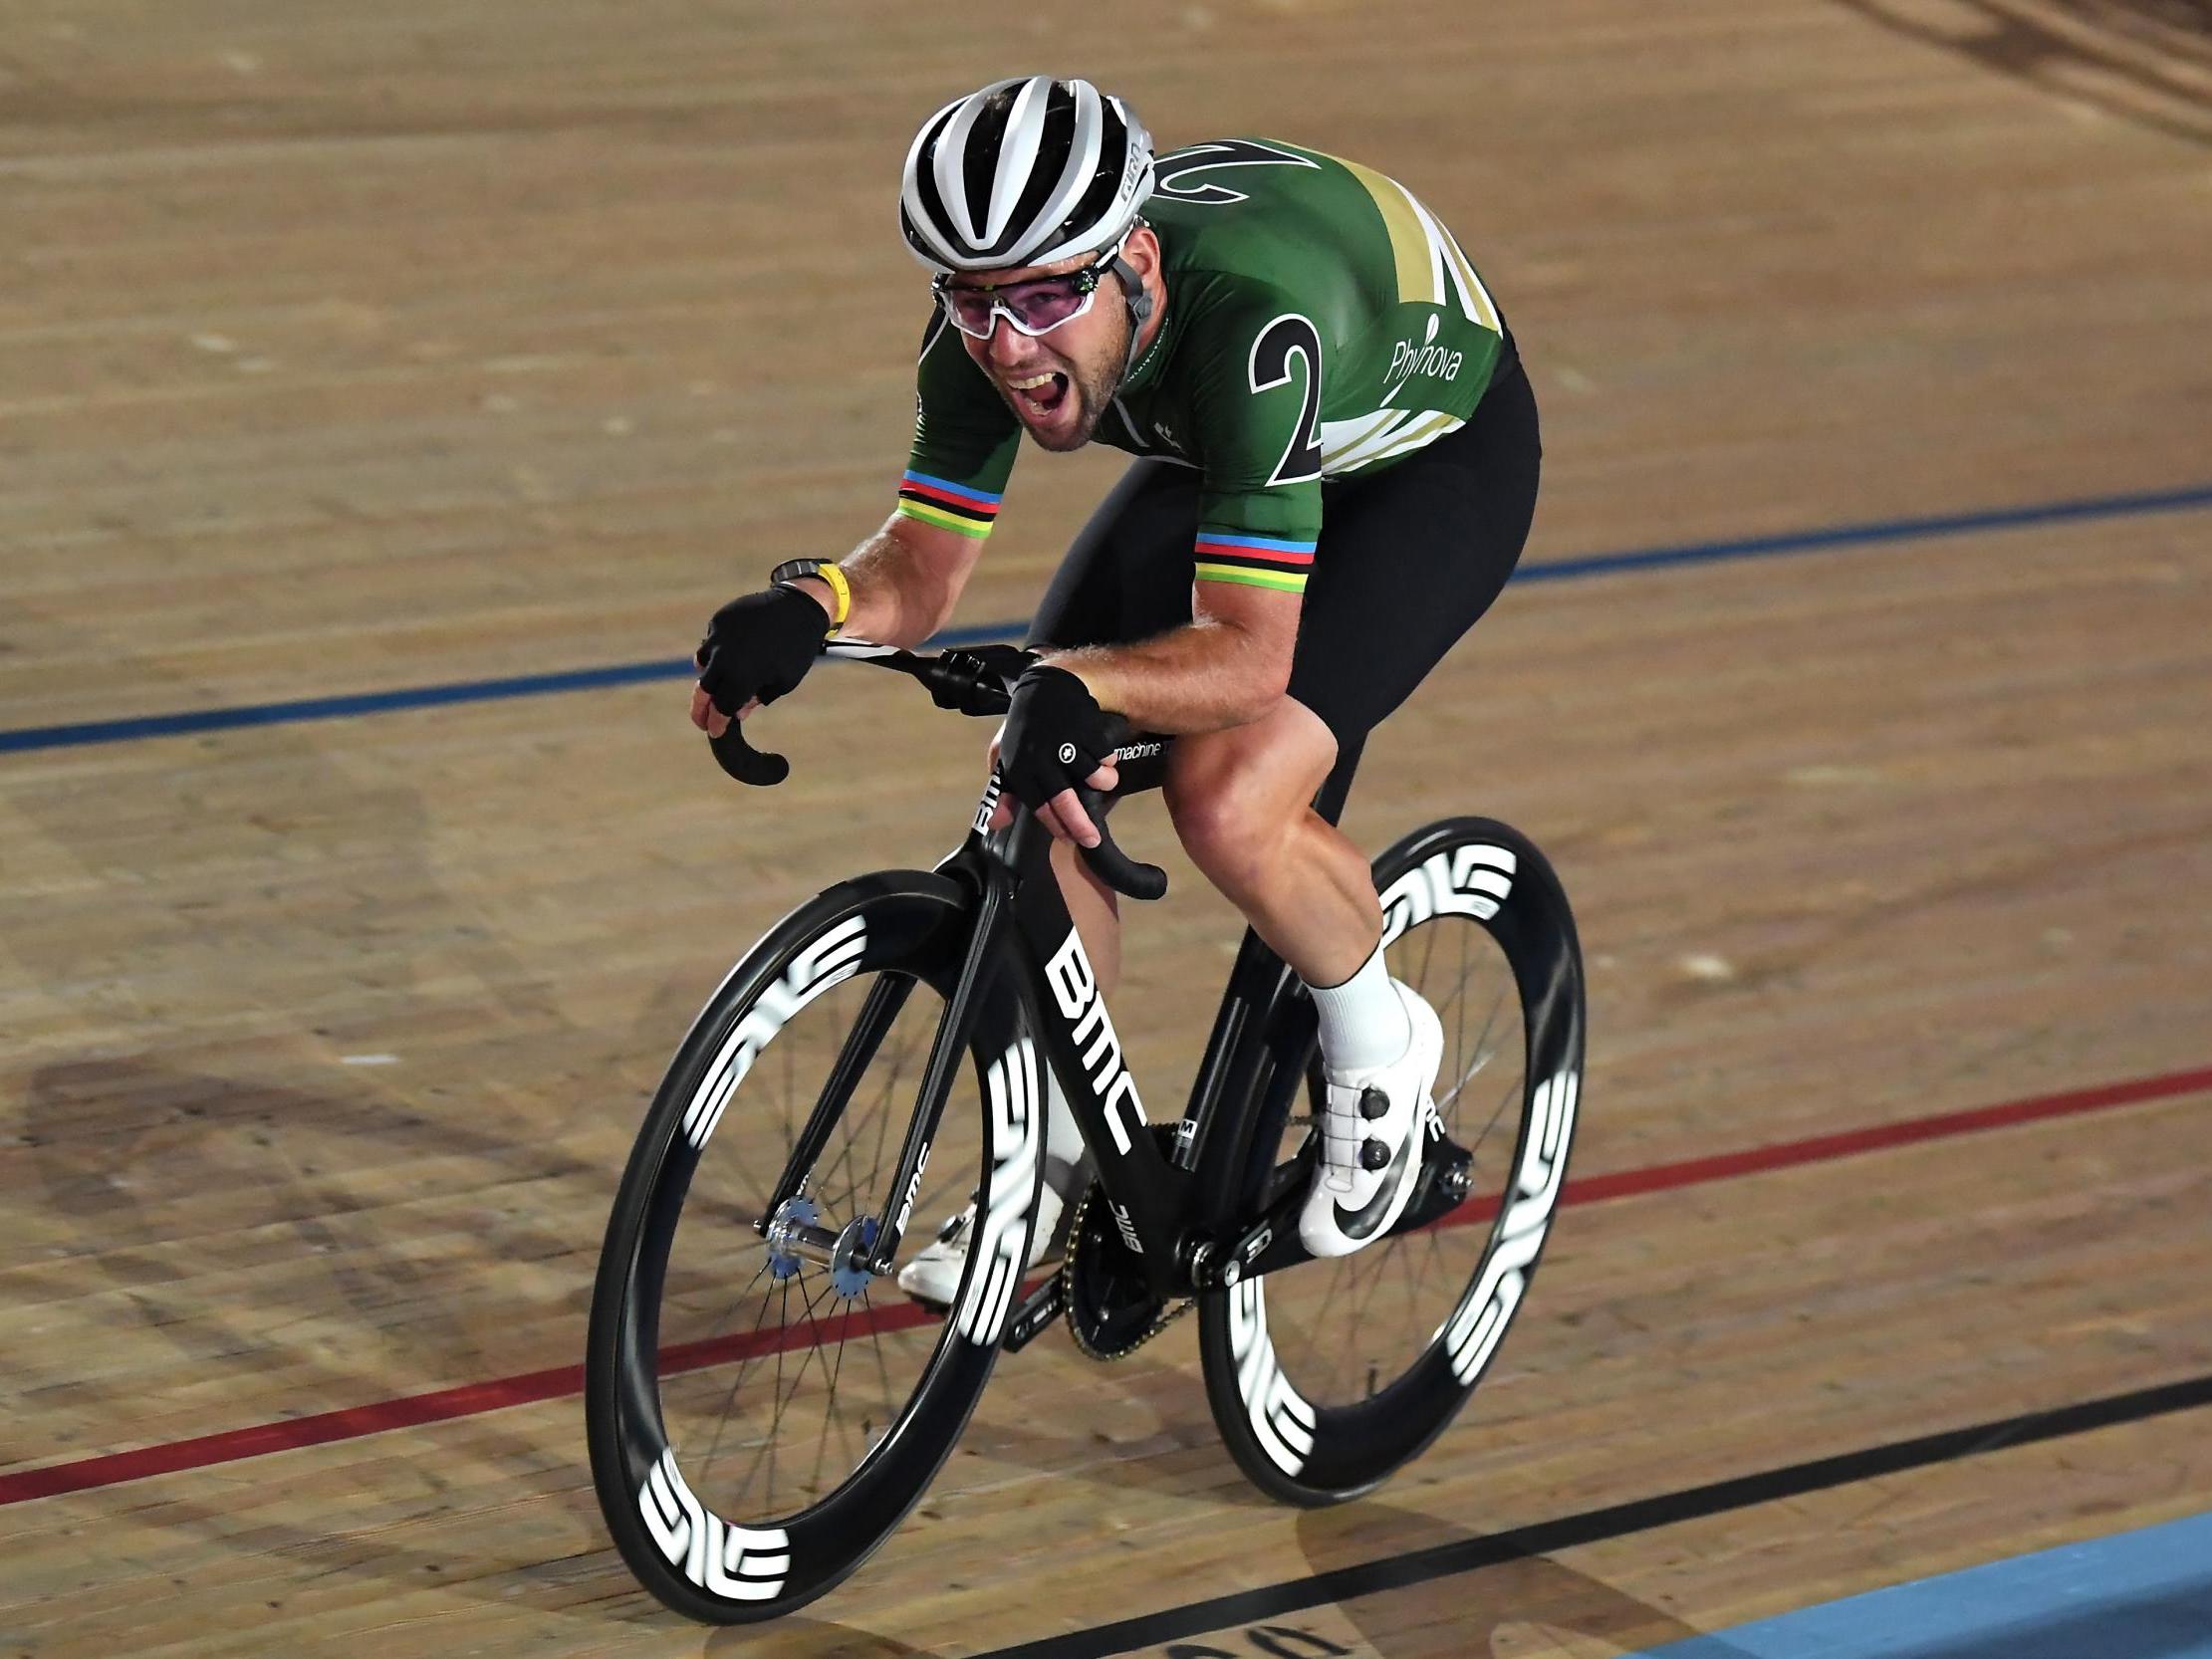 Mark Cavendish wins the Madison Chase in London in October 2019